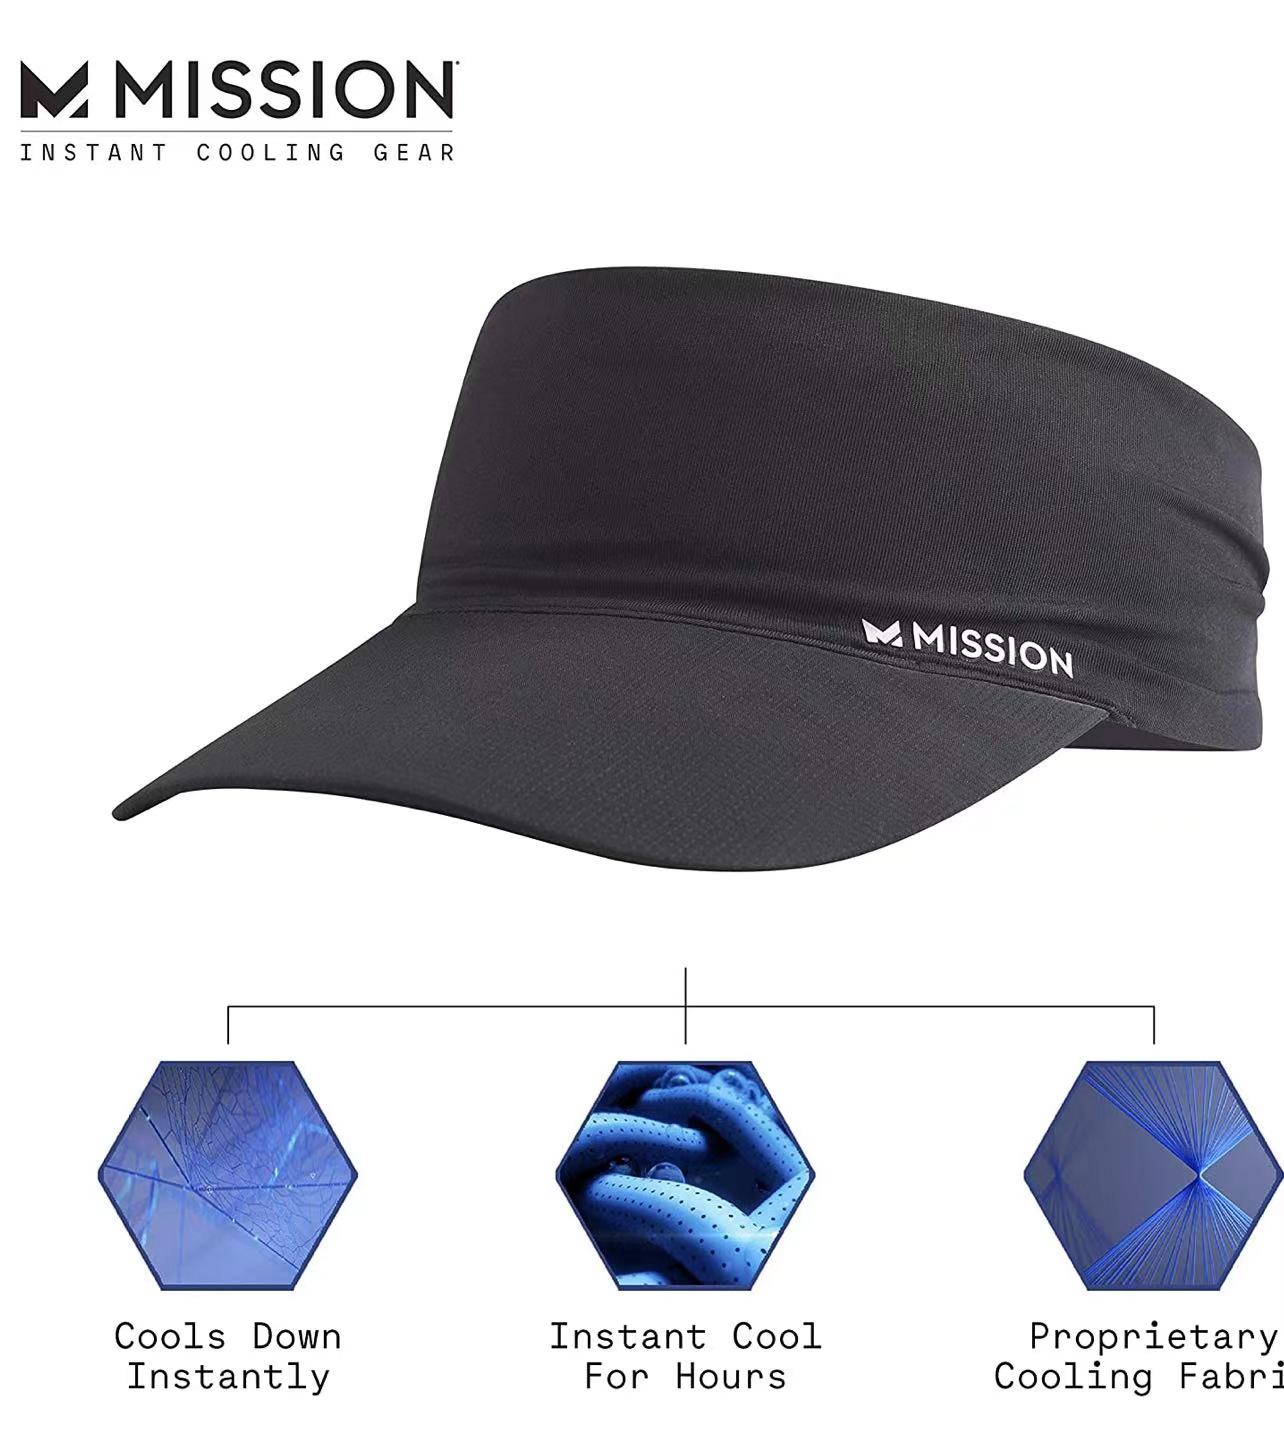 MISSION Cooling Performance Hat Adult Unisex Baseball Cap, Cools When Wet,  UPF 50, Navy